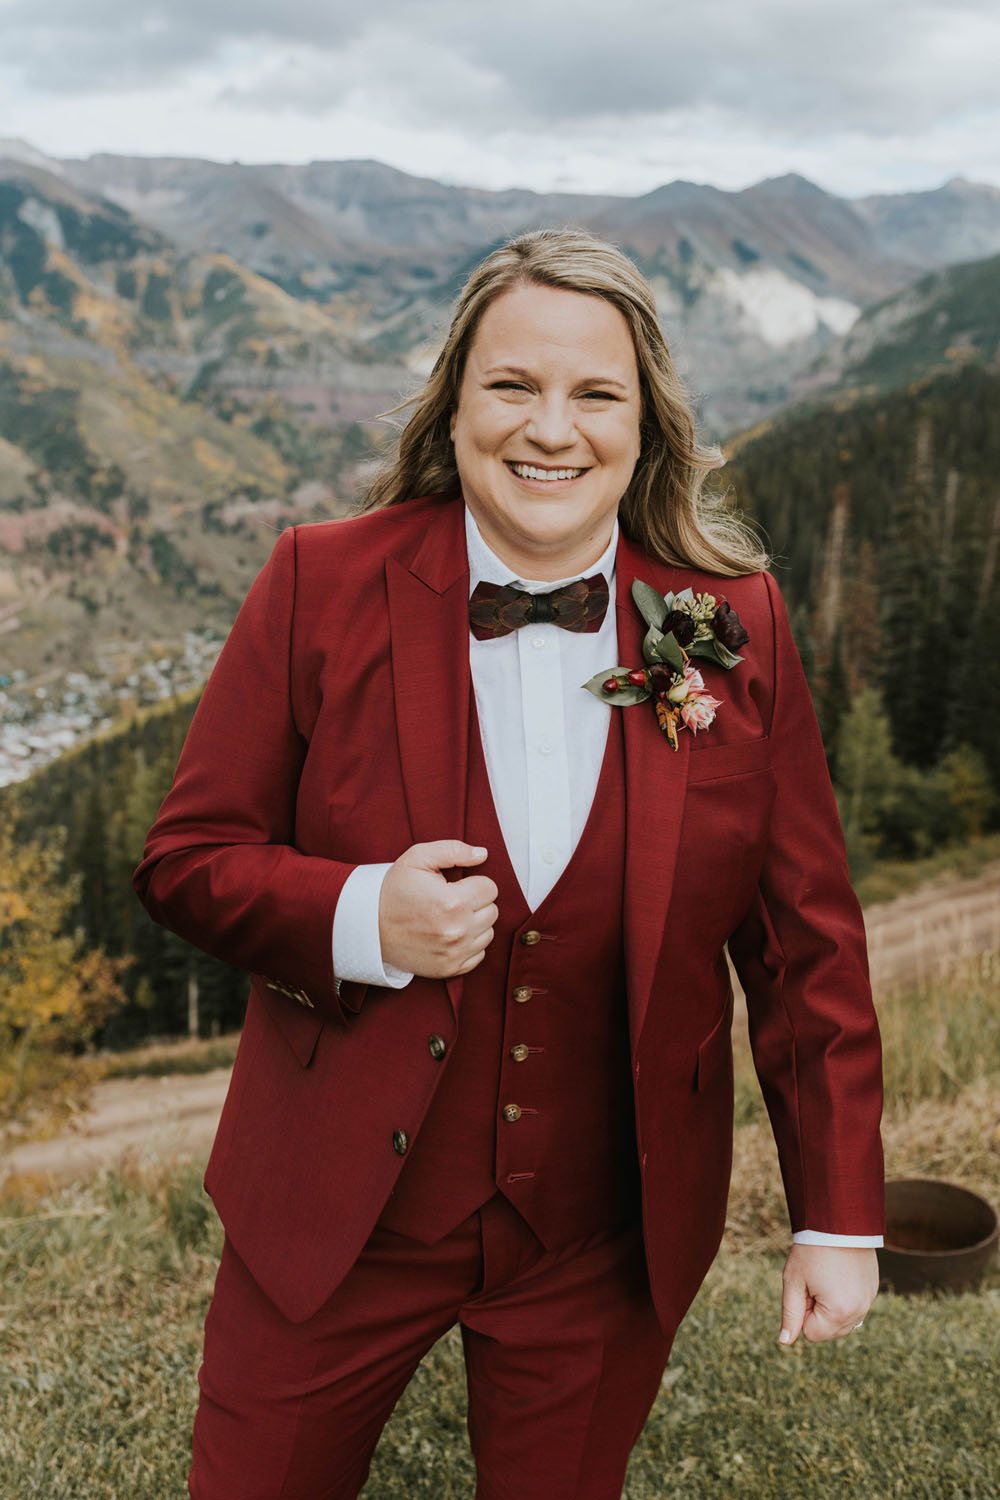  a bride standing on a balcony smiling wearing a lovely burgundy bridal suit  